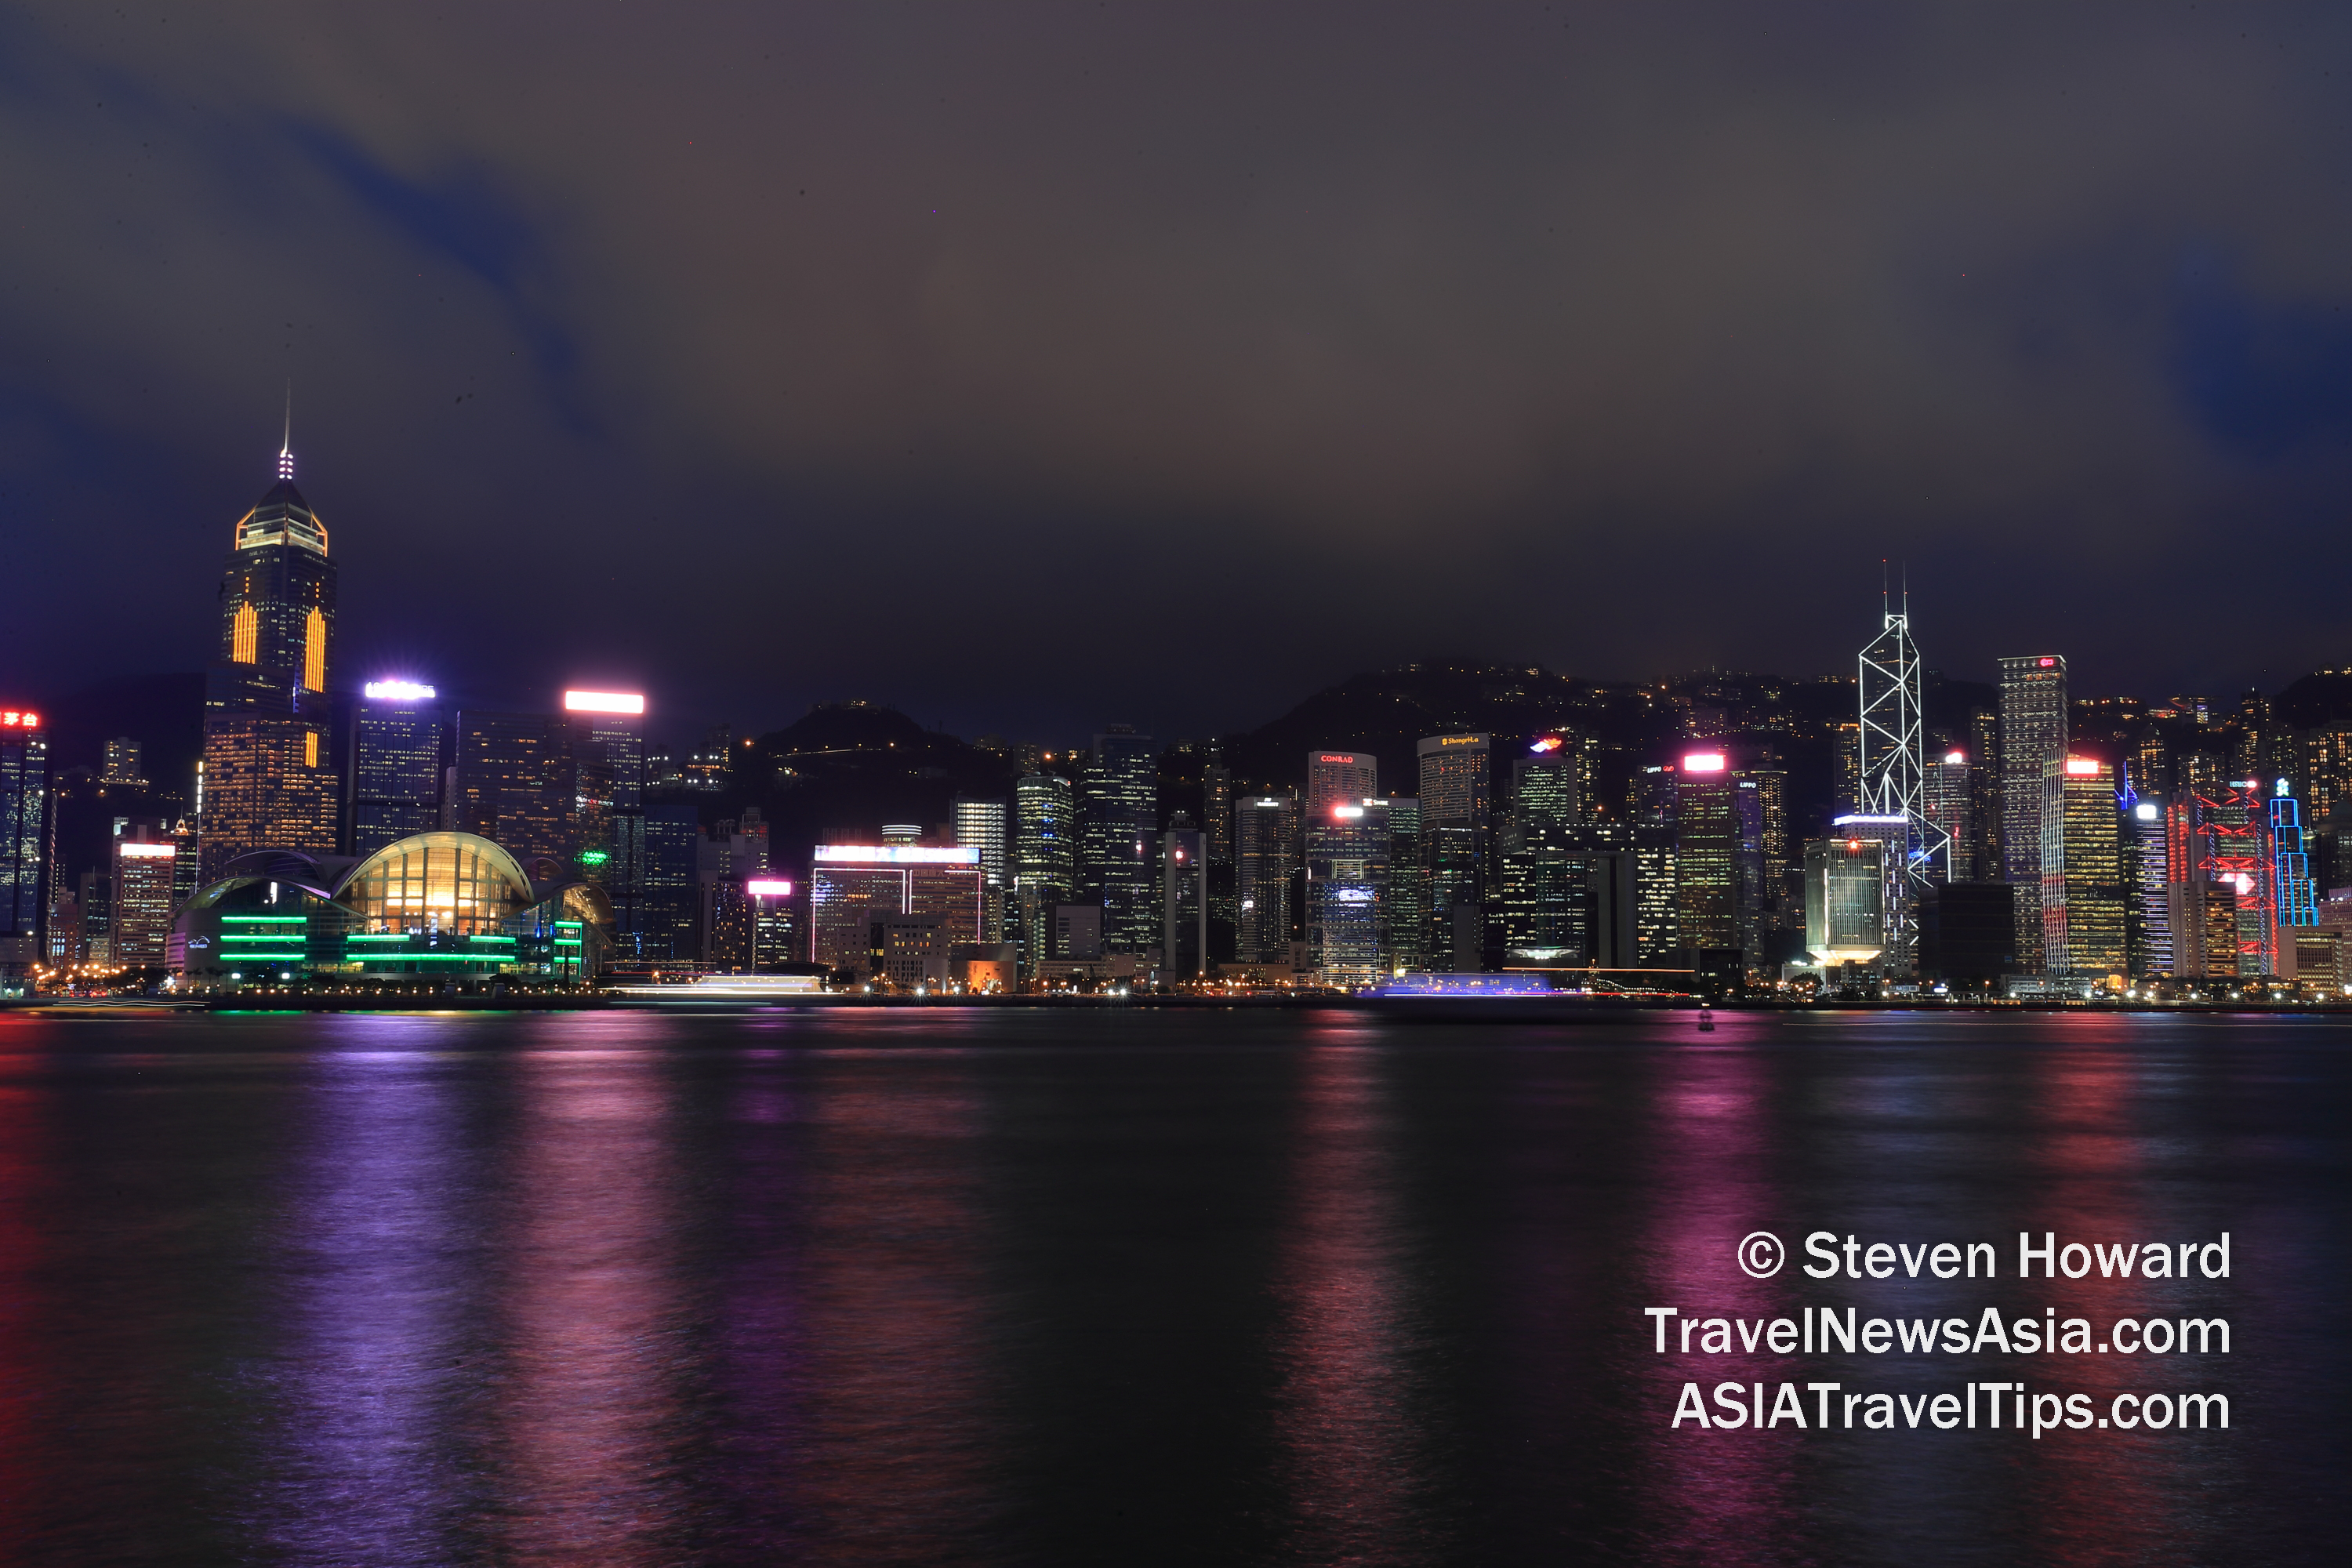 Hong Kong island at night. Picture by Steven Howard of TravelNewsAsia.com Click to enlarge.